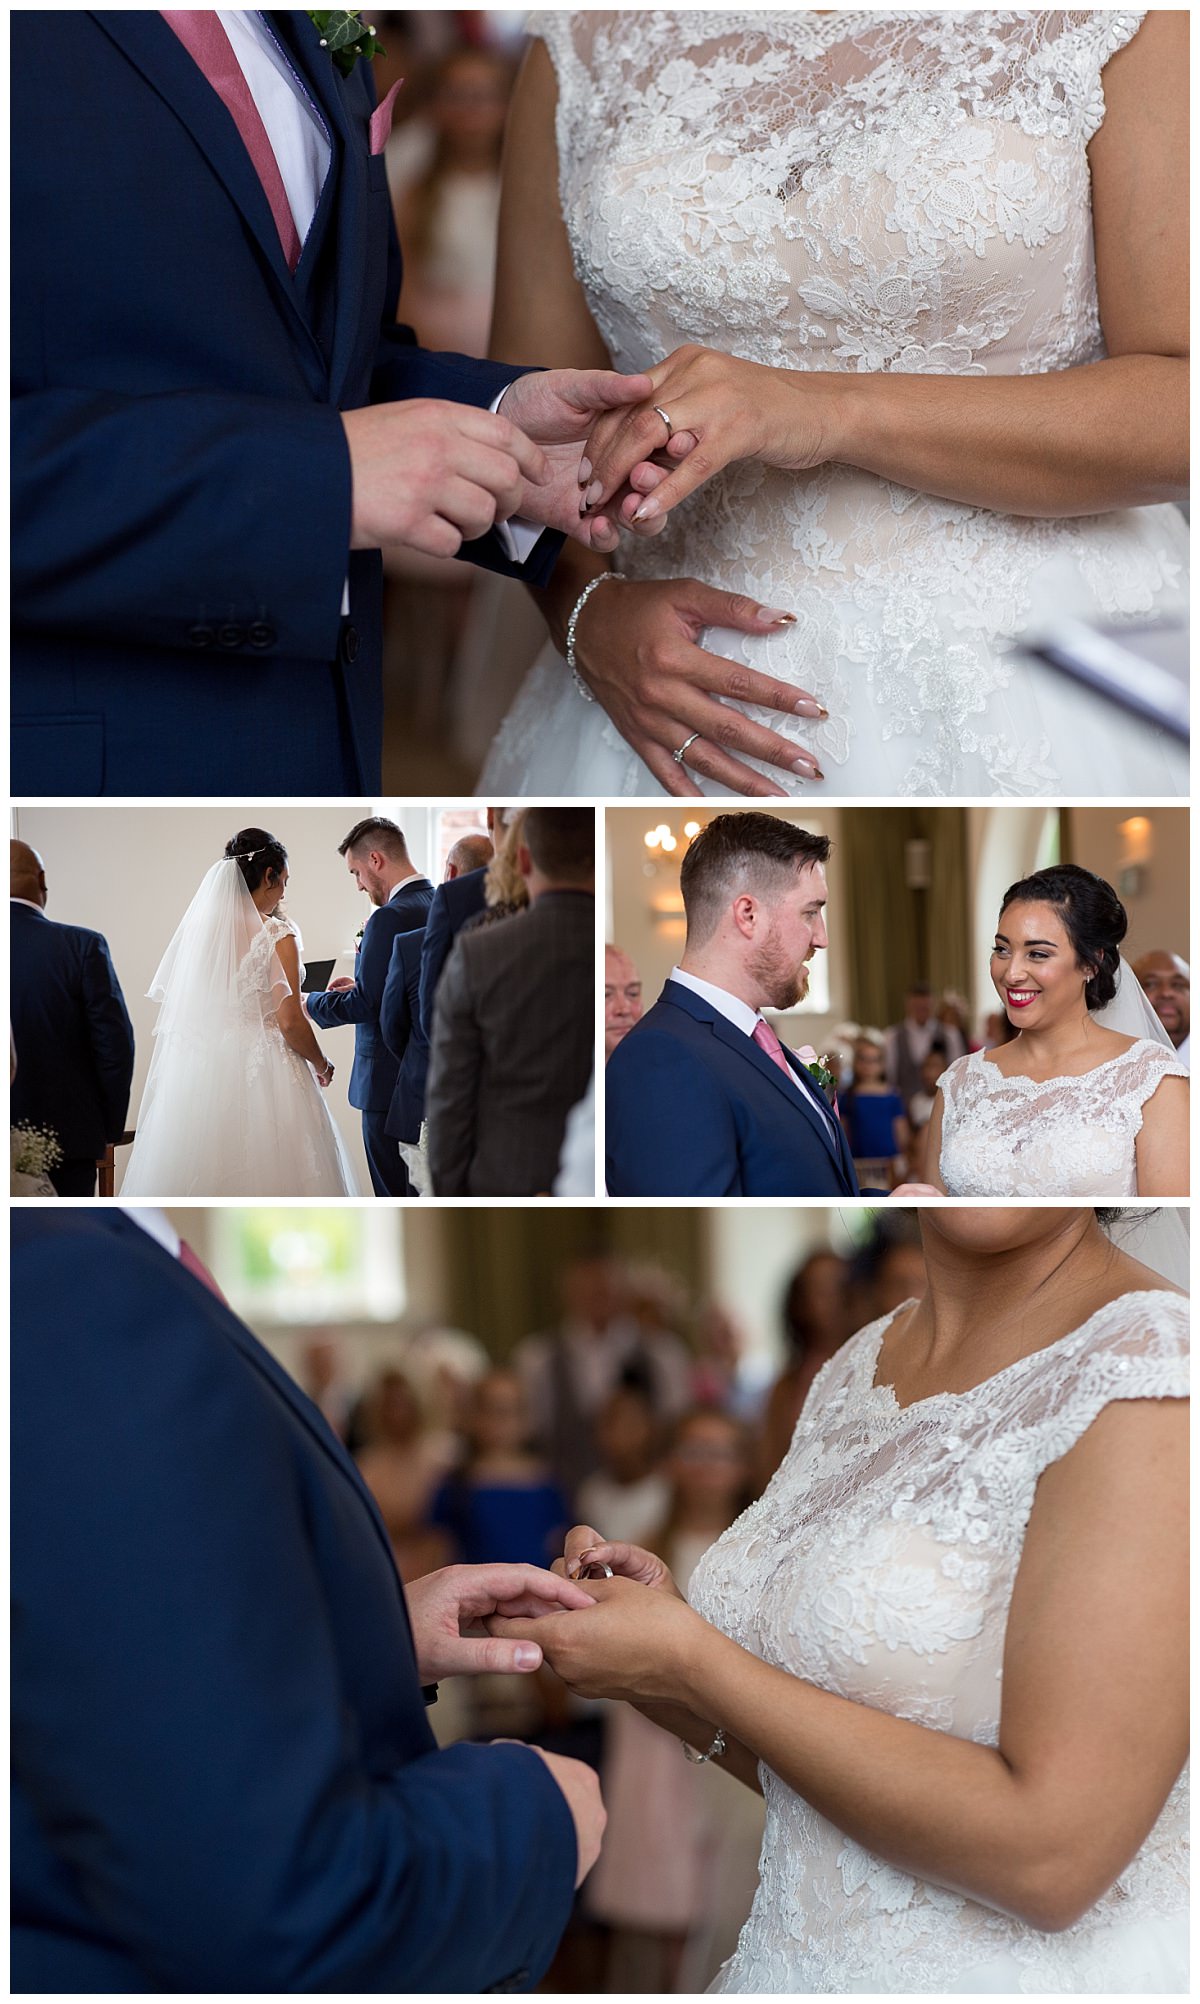 bride and groom placing rings on fingers at Iscoyd Park wedding ceremony